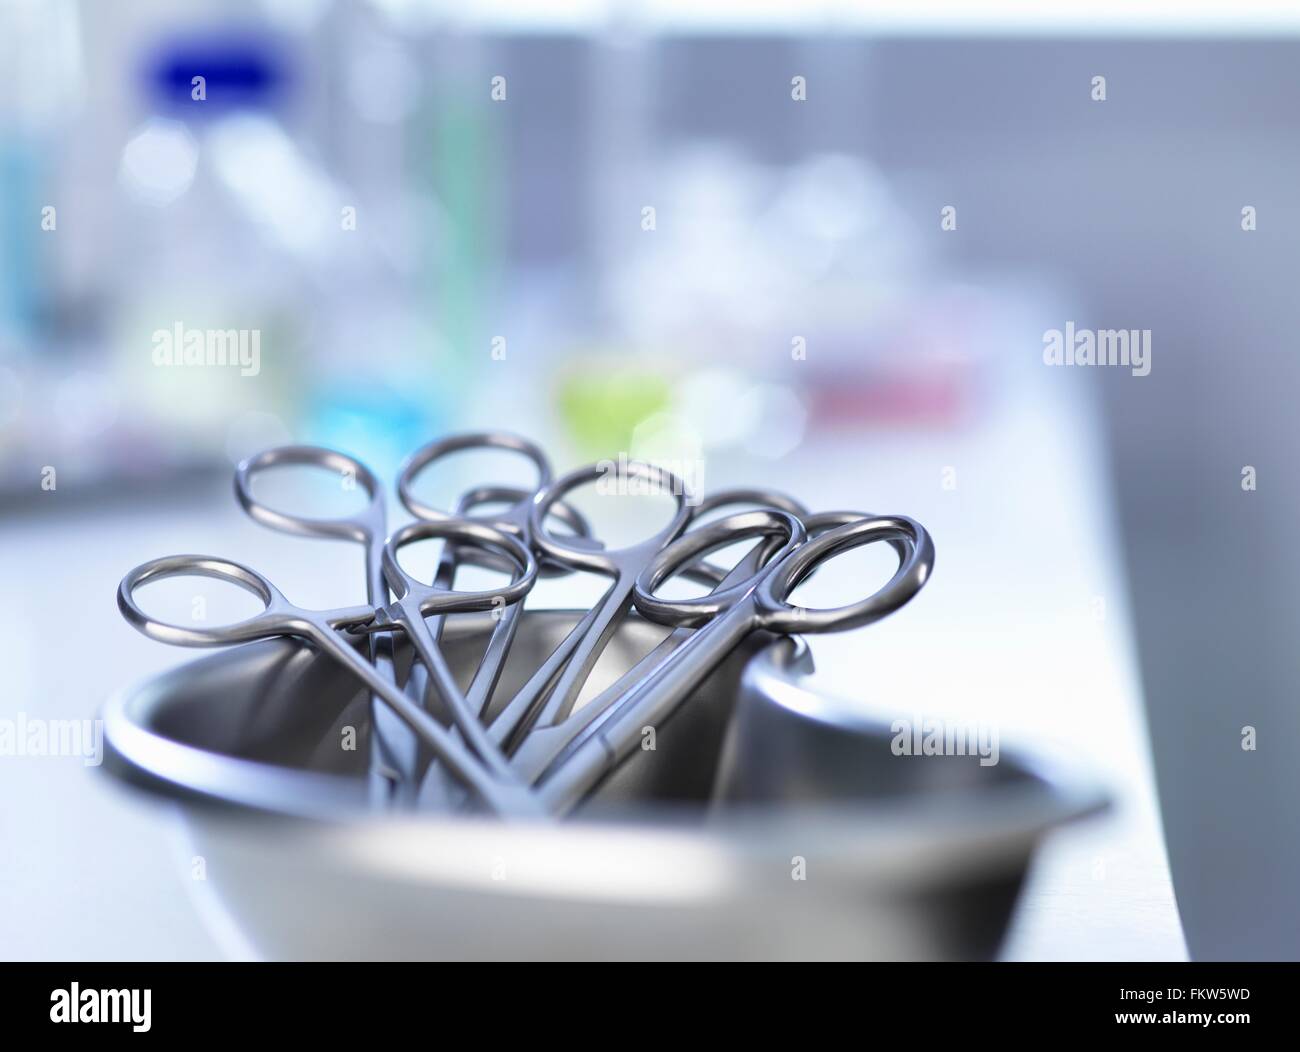 Kidney-shaped tray with surgical scissors Stock Photo